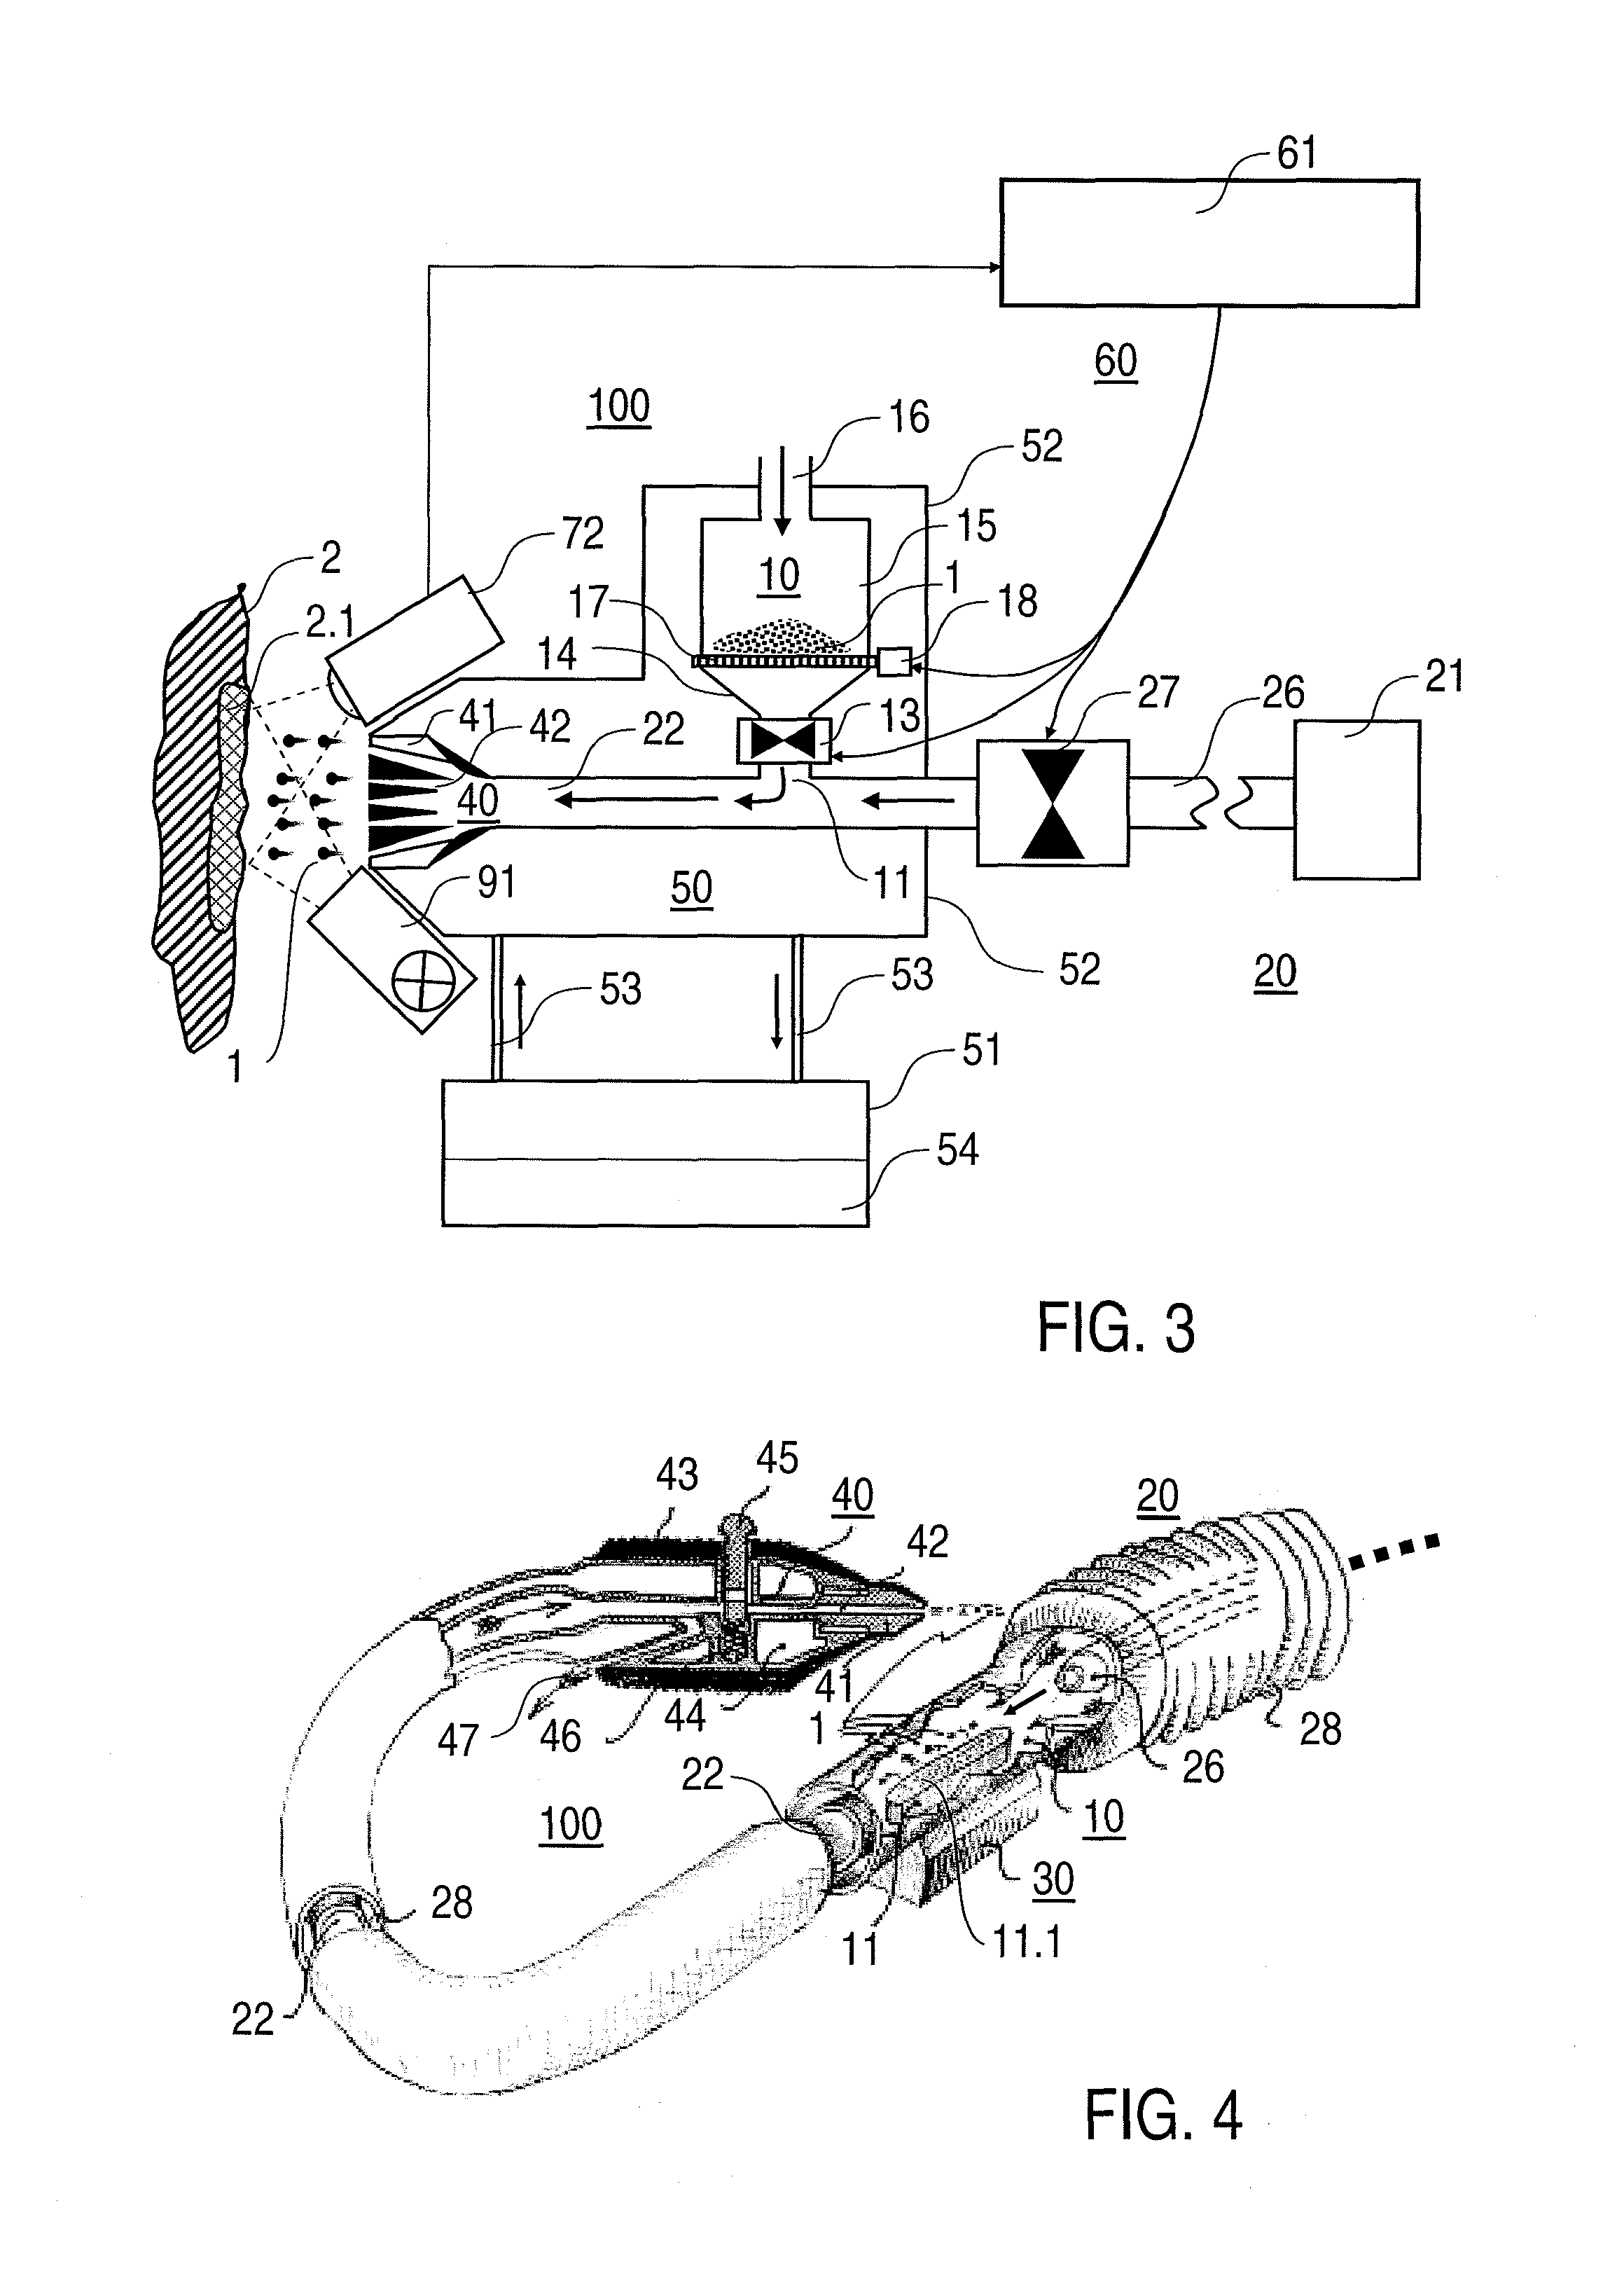 Apparatus and method for the deposition of biological material in a target substrate